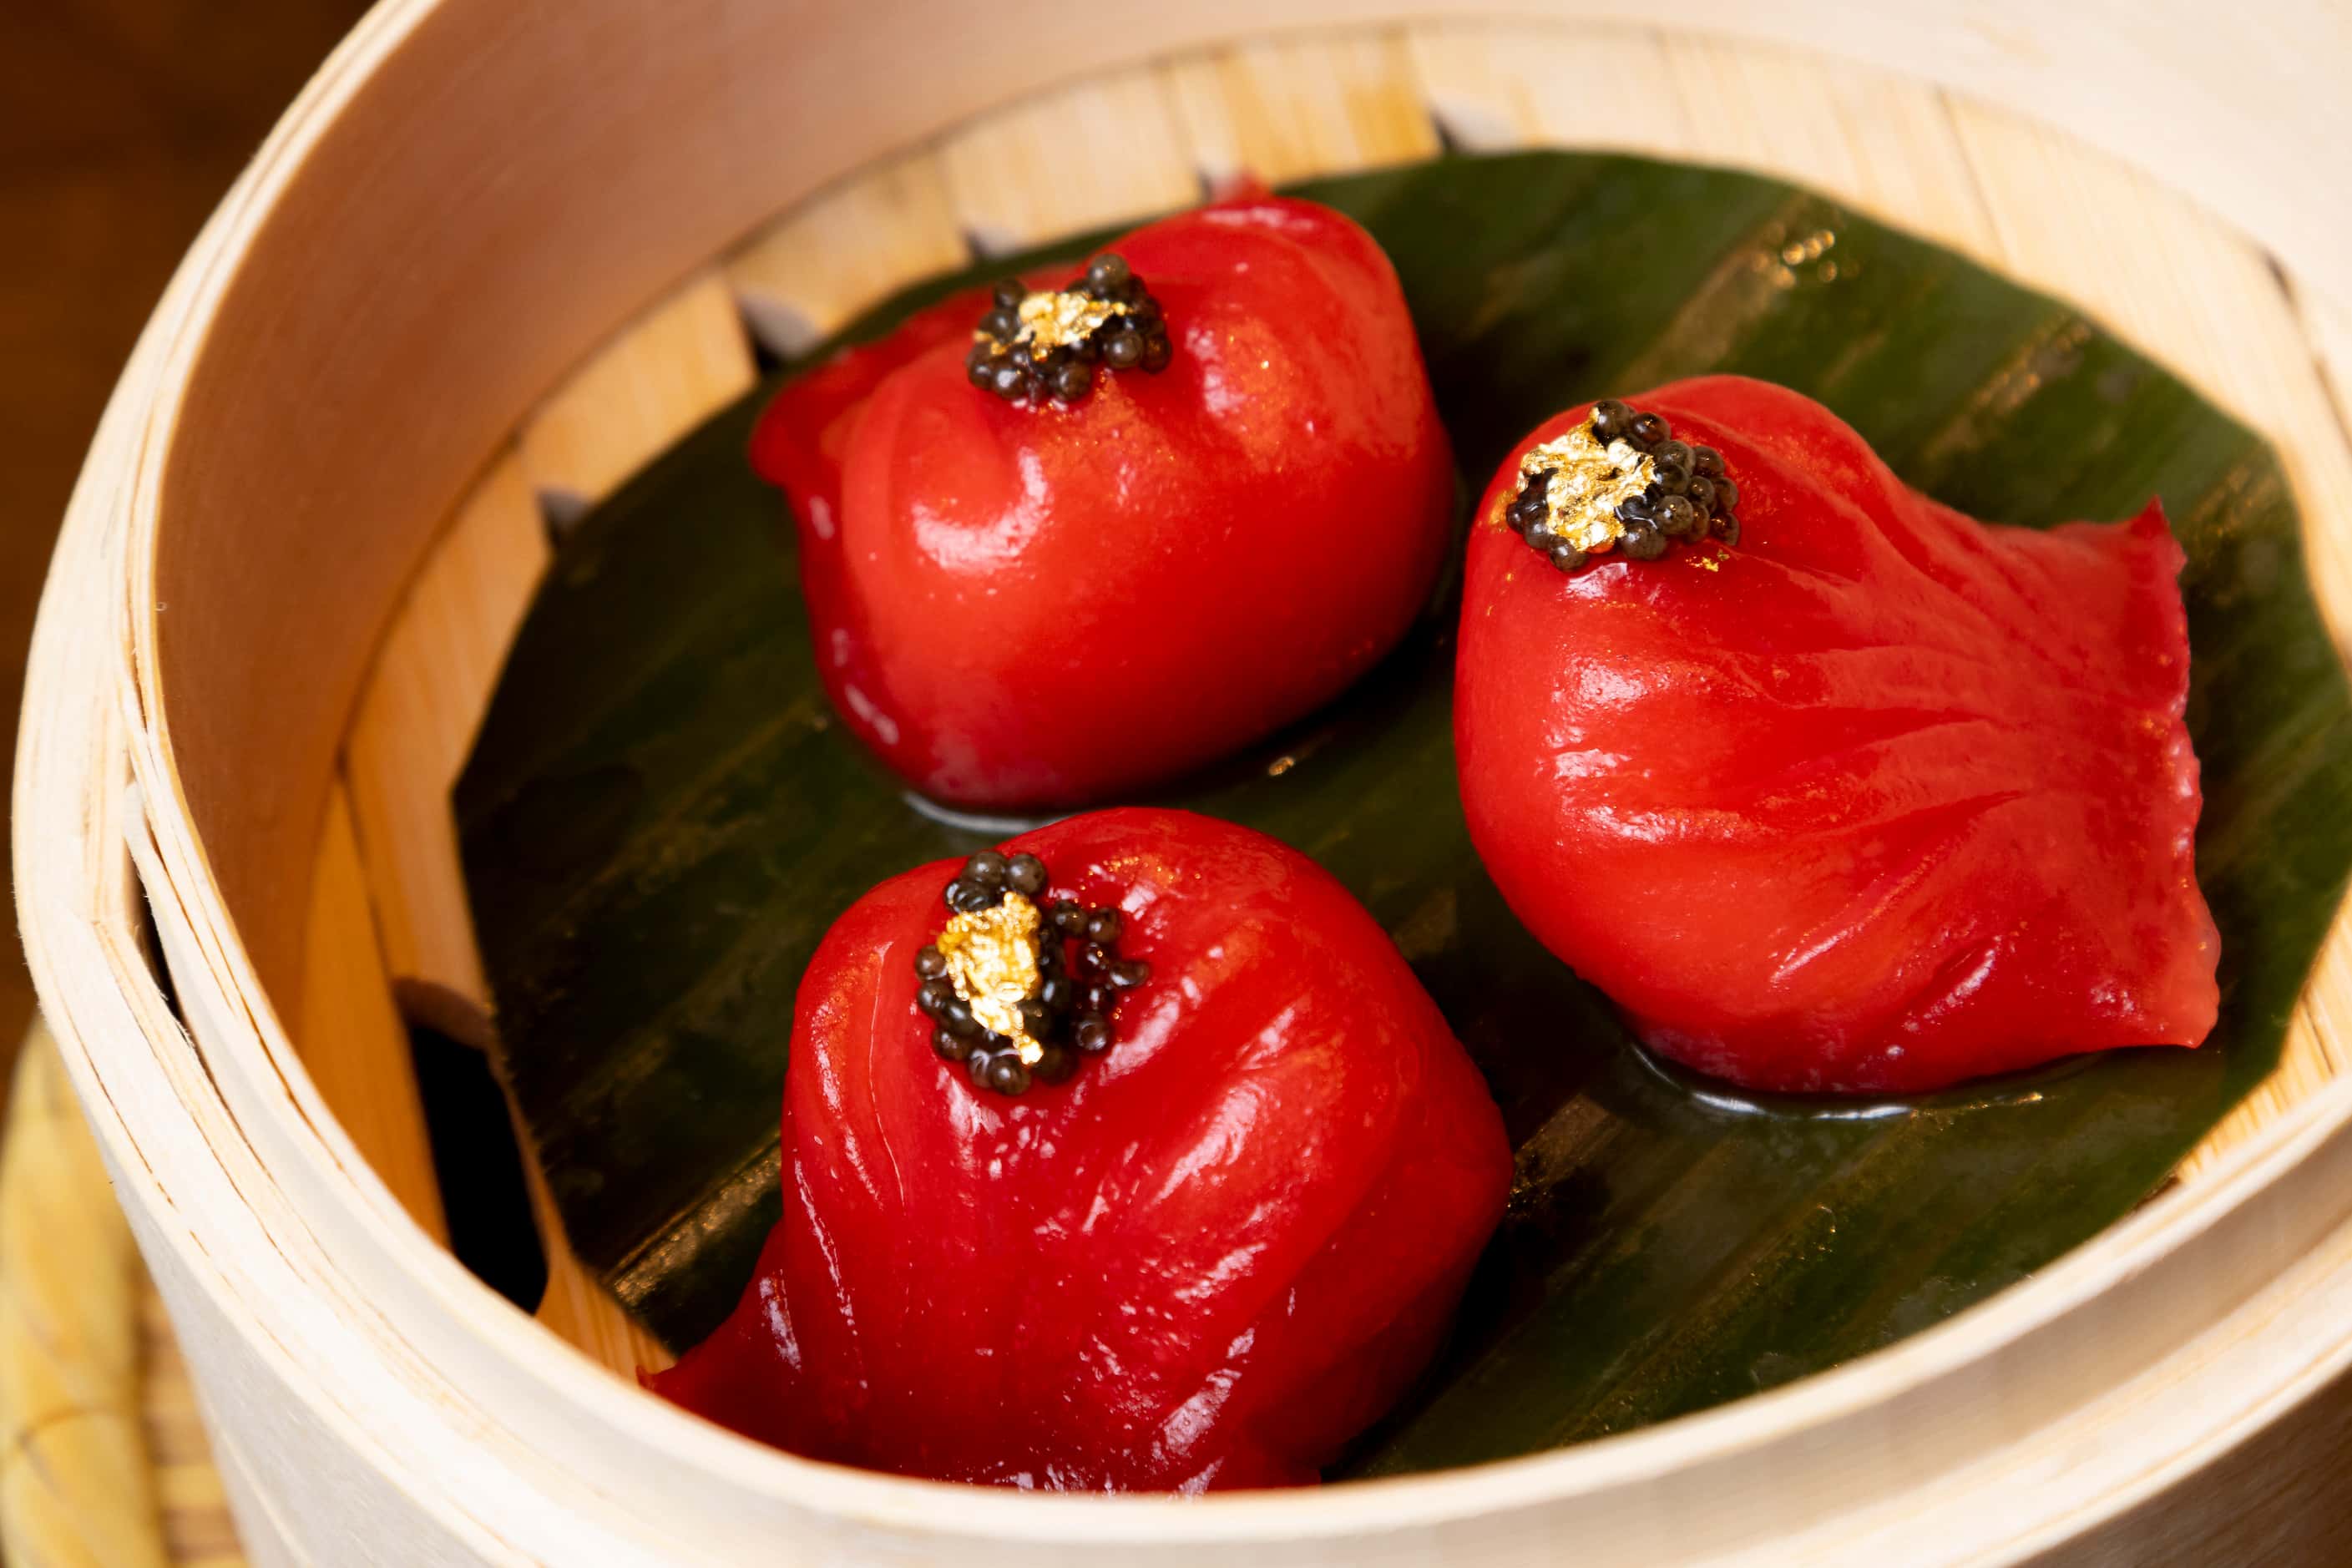 The King Prawn Dumplings, or Har Gow, are prepared with black caviar and gold leaf on top at...